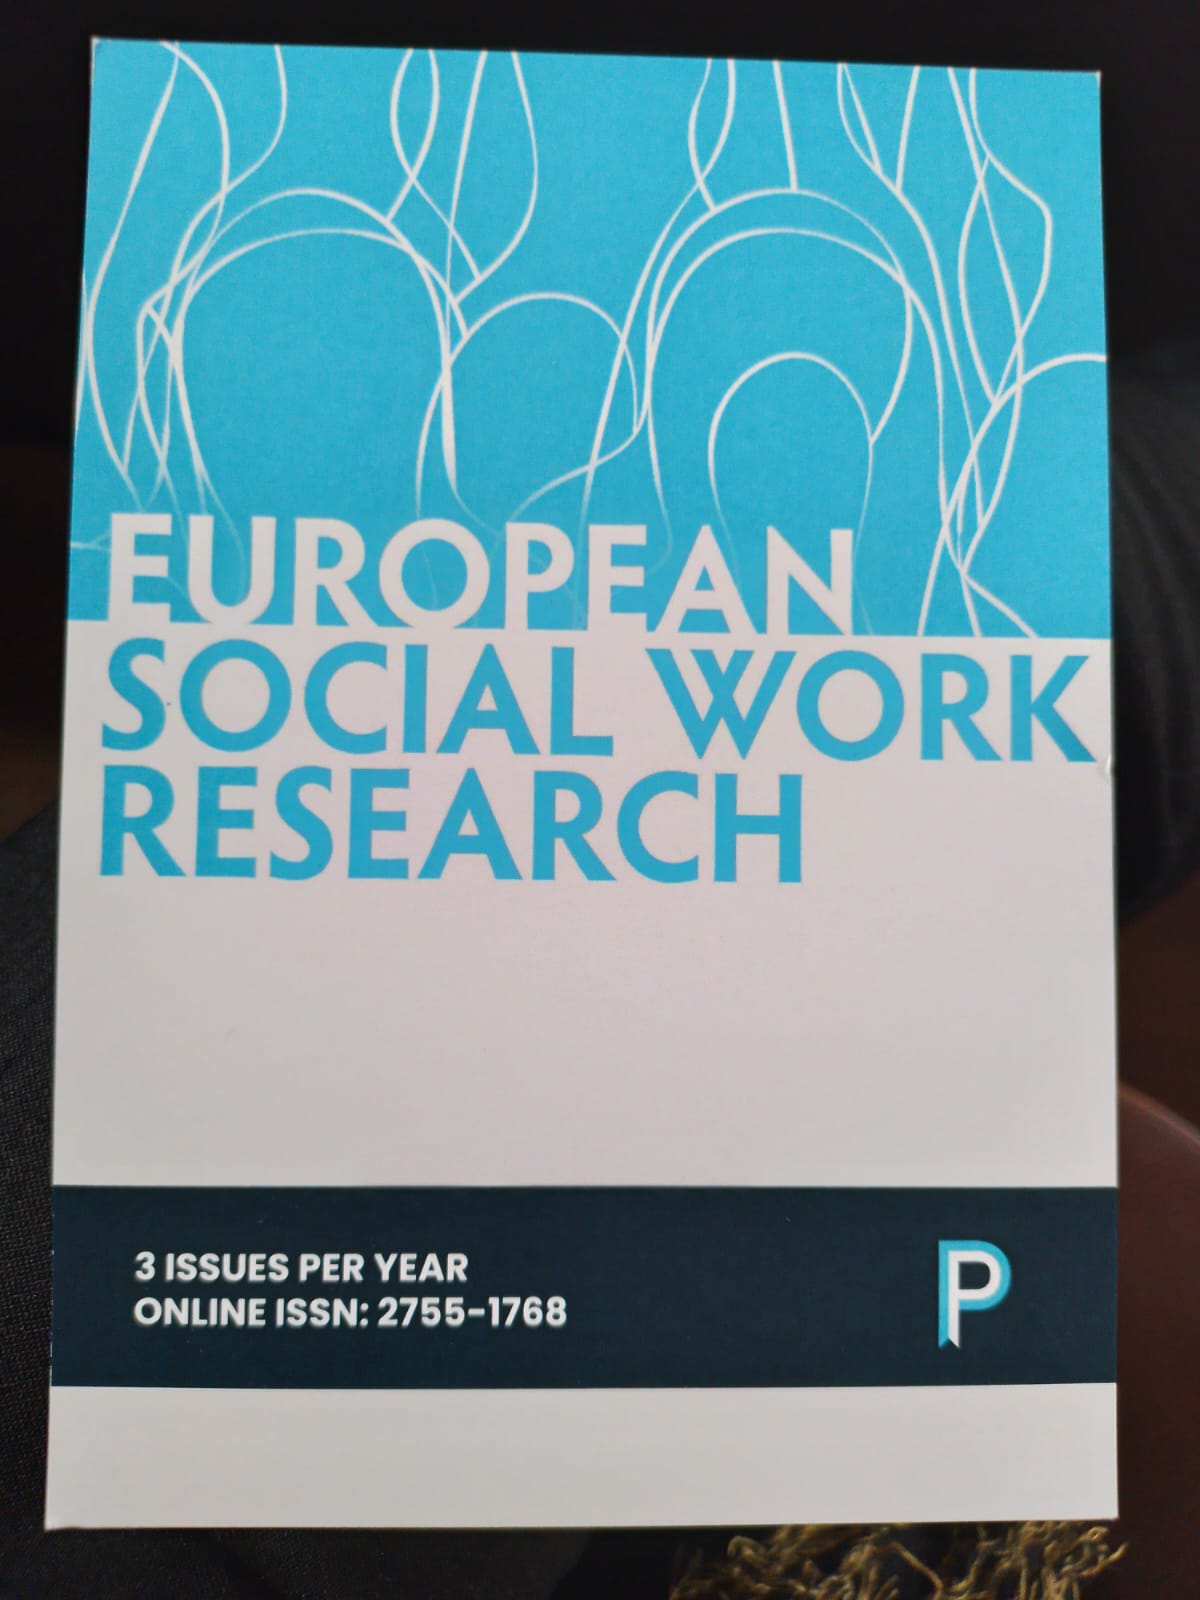 12th european conference for social work research